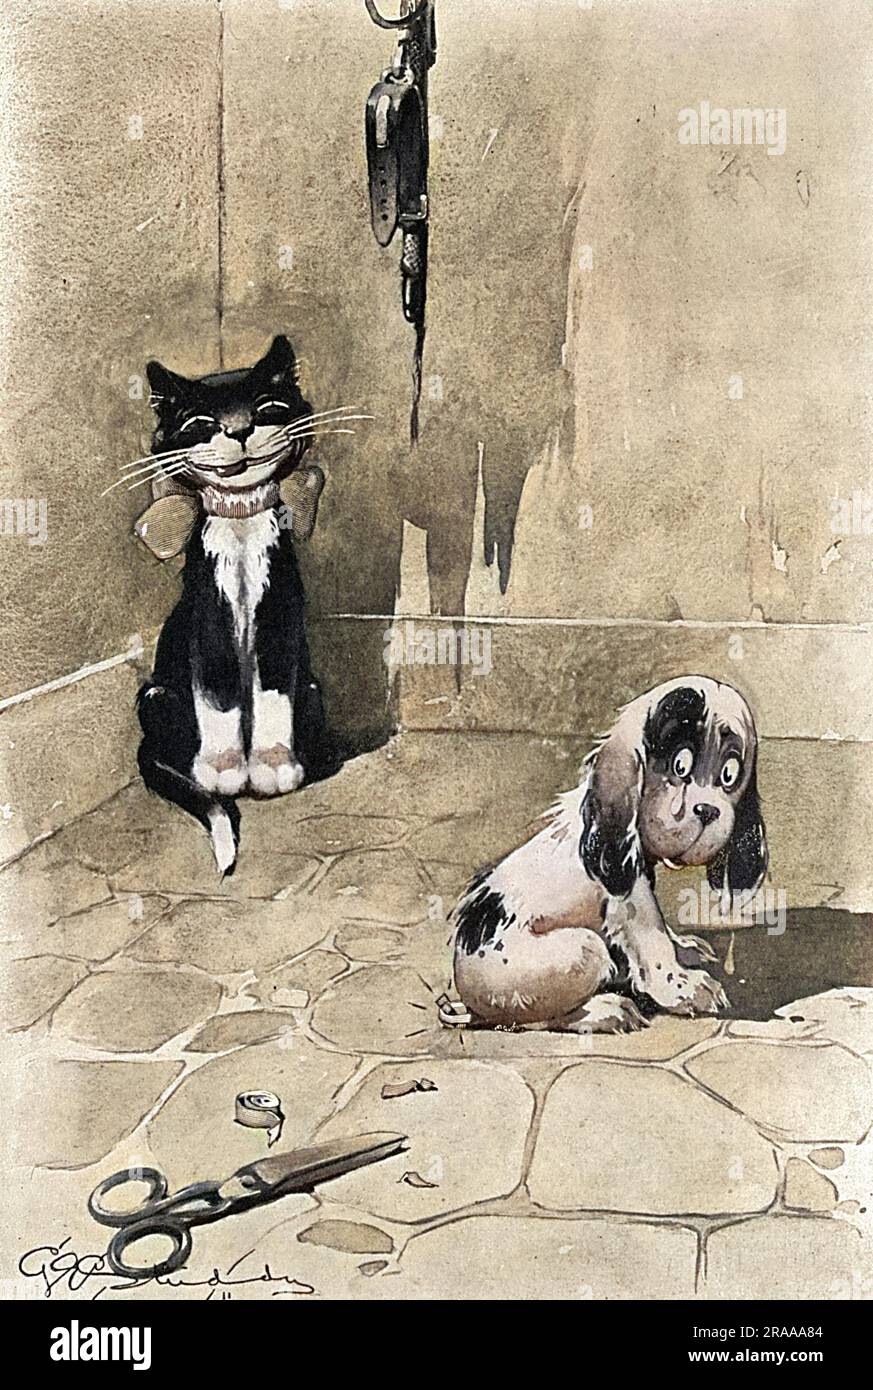 Early illustration by G. E. Studdy showing a tearful Spaniel with a recently docked tail being grinned at by a smug cat. George Ernest Studdy (1878-1948), was the creator of 'Bonzo', a small dog with saucer-like eyes and indiscriminate breeding who first appeared in the Sketch in 1922. The 'Bonzo' craze swept the world resulting in postcards, annuals, toys and other merchandise. Studdy also produced a large body of work for the Sketch before and after Bonzo including his later creation, Ooloo the cat. His early cartoon dogs were simply known as the 'Studdy Dog' until readers demanded a name an Stock Photo